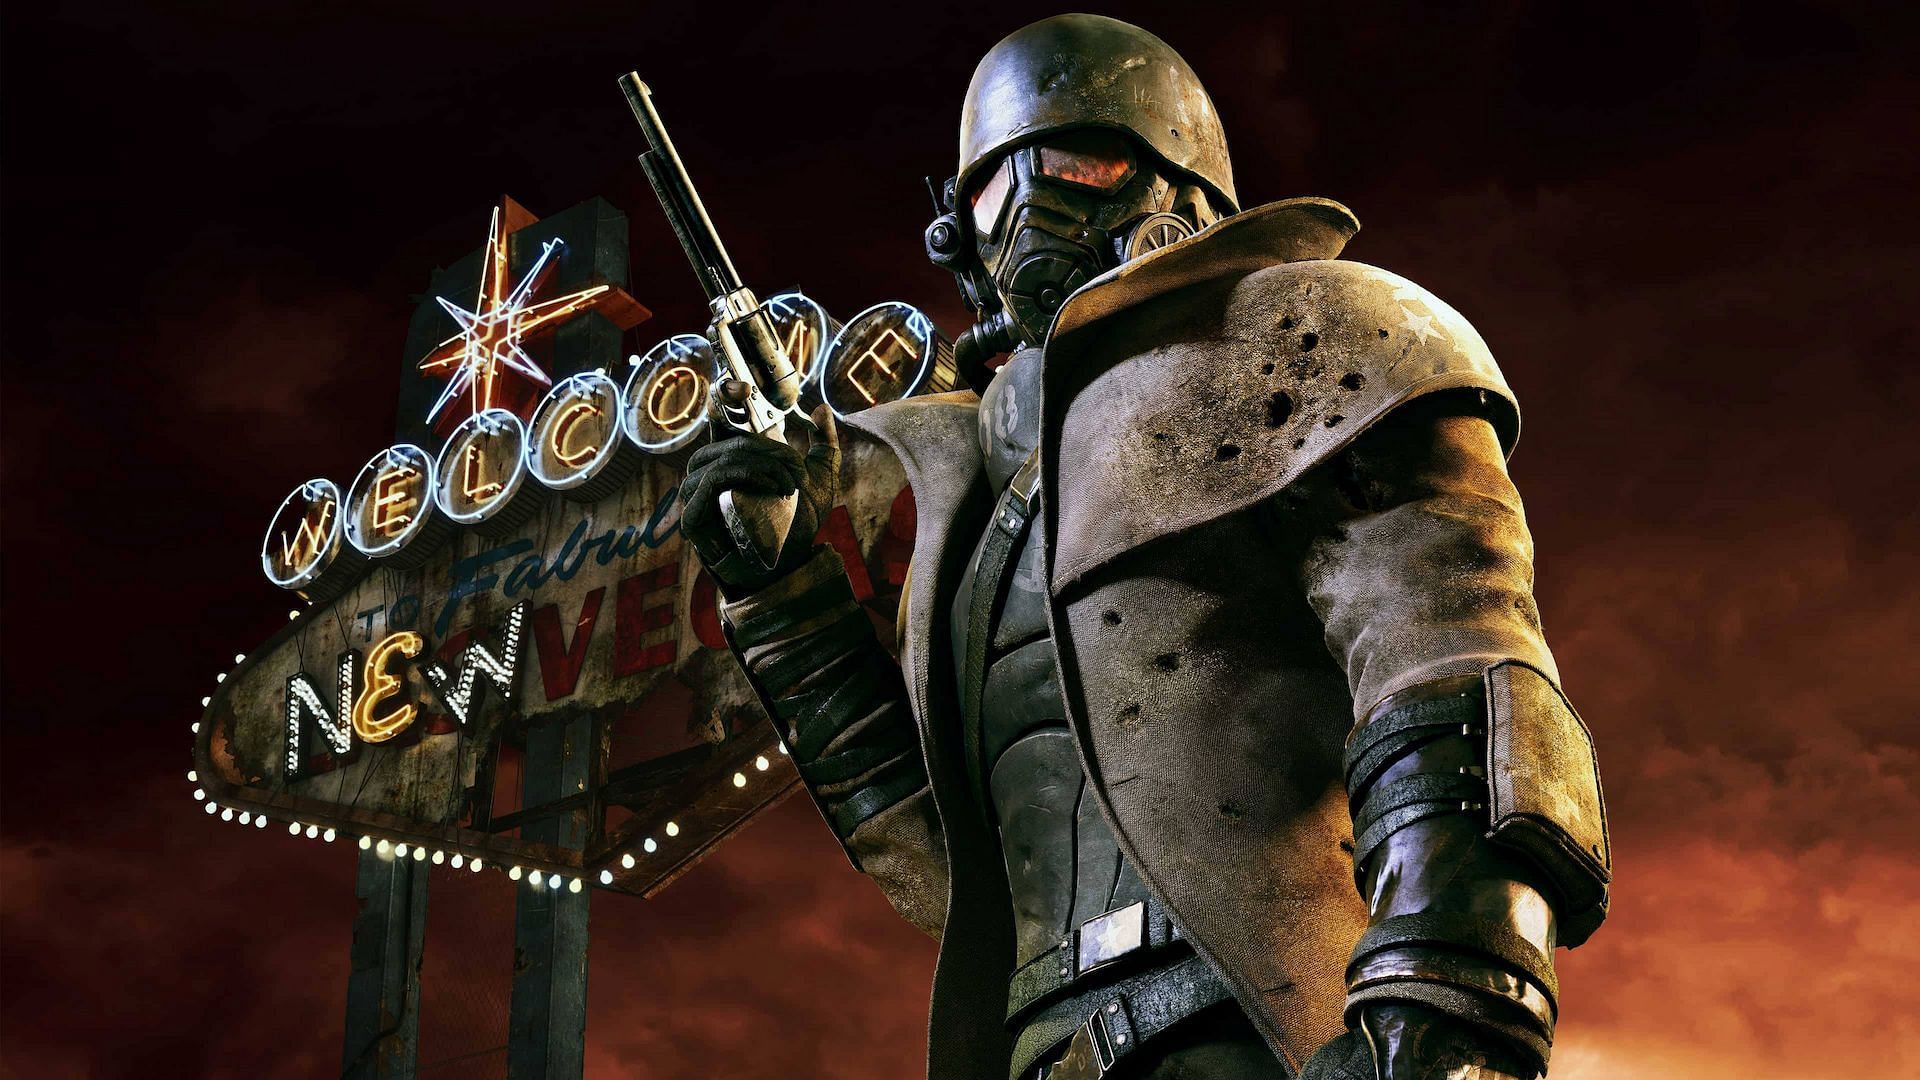 The Courier is the protagonist of Fallout: New Vegas (Image via Bethesda Softworks)